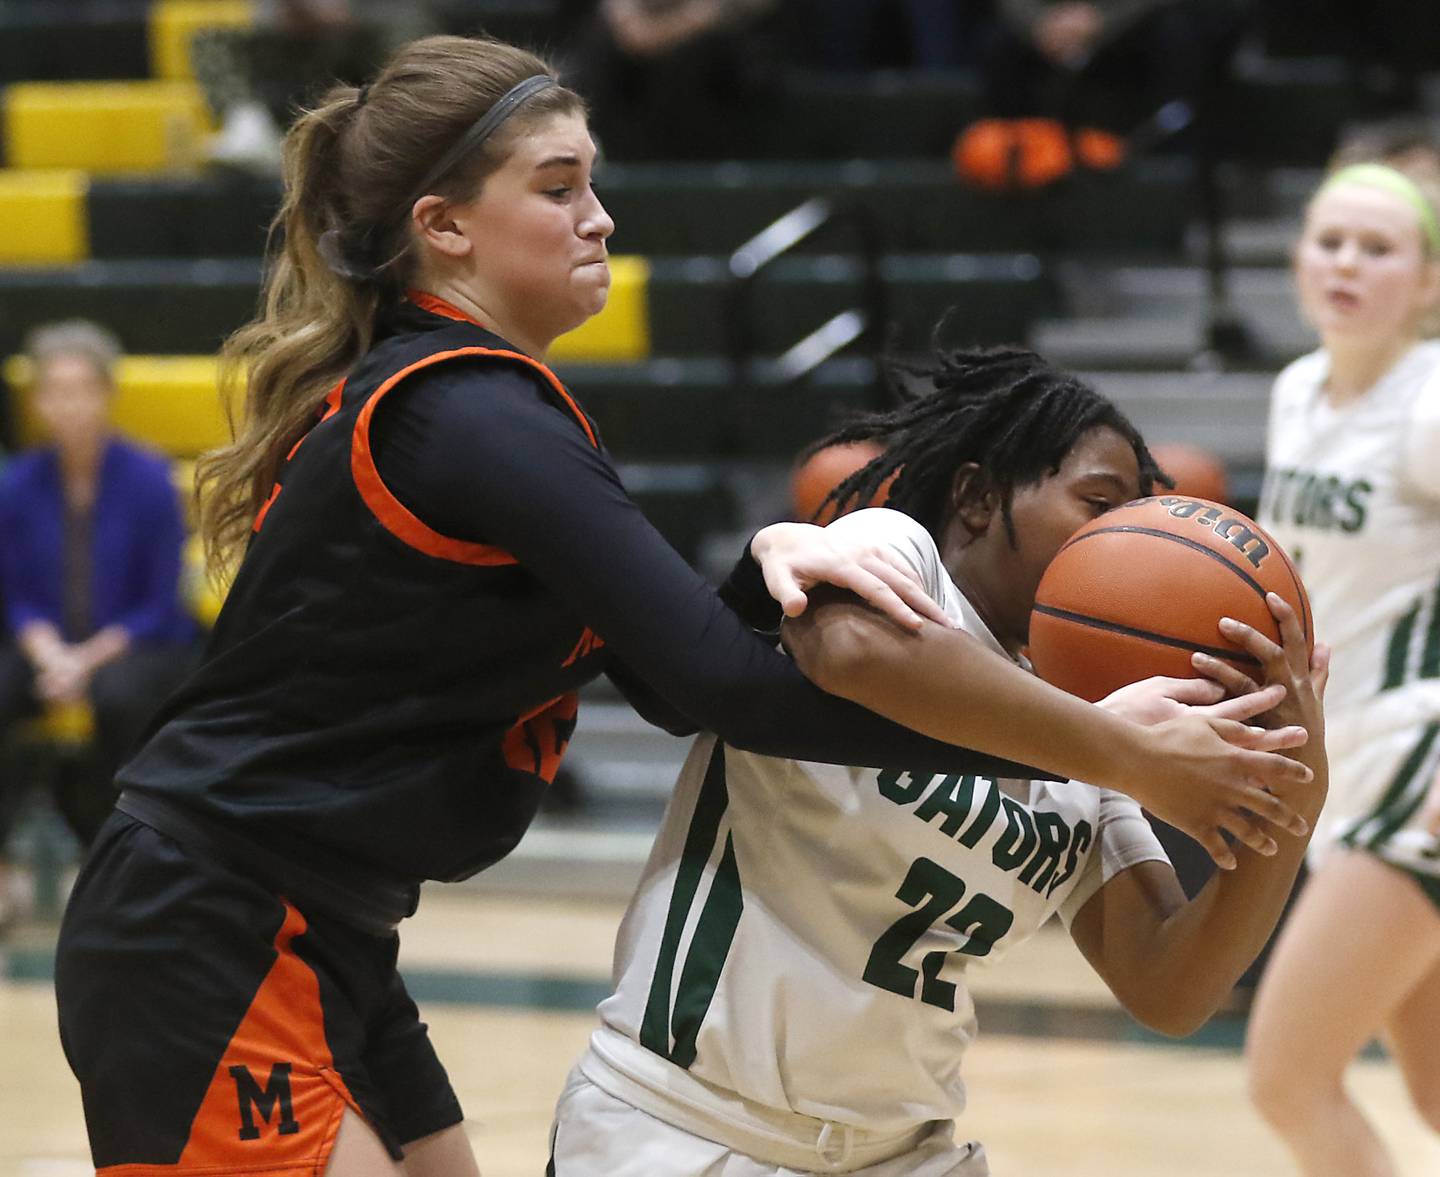 McHenry's Madalynn Friedle tries to knock the ball away from Crystal Lake South's Gabrielle Toussaint during a Fox Valley Conference girls basketball game Tuesday Jan. 10, 2023, at Crystal Lake South High School.